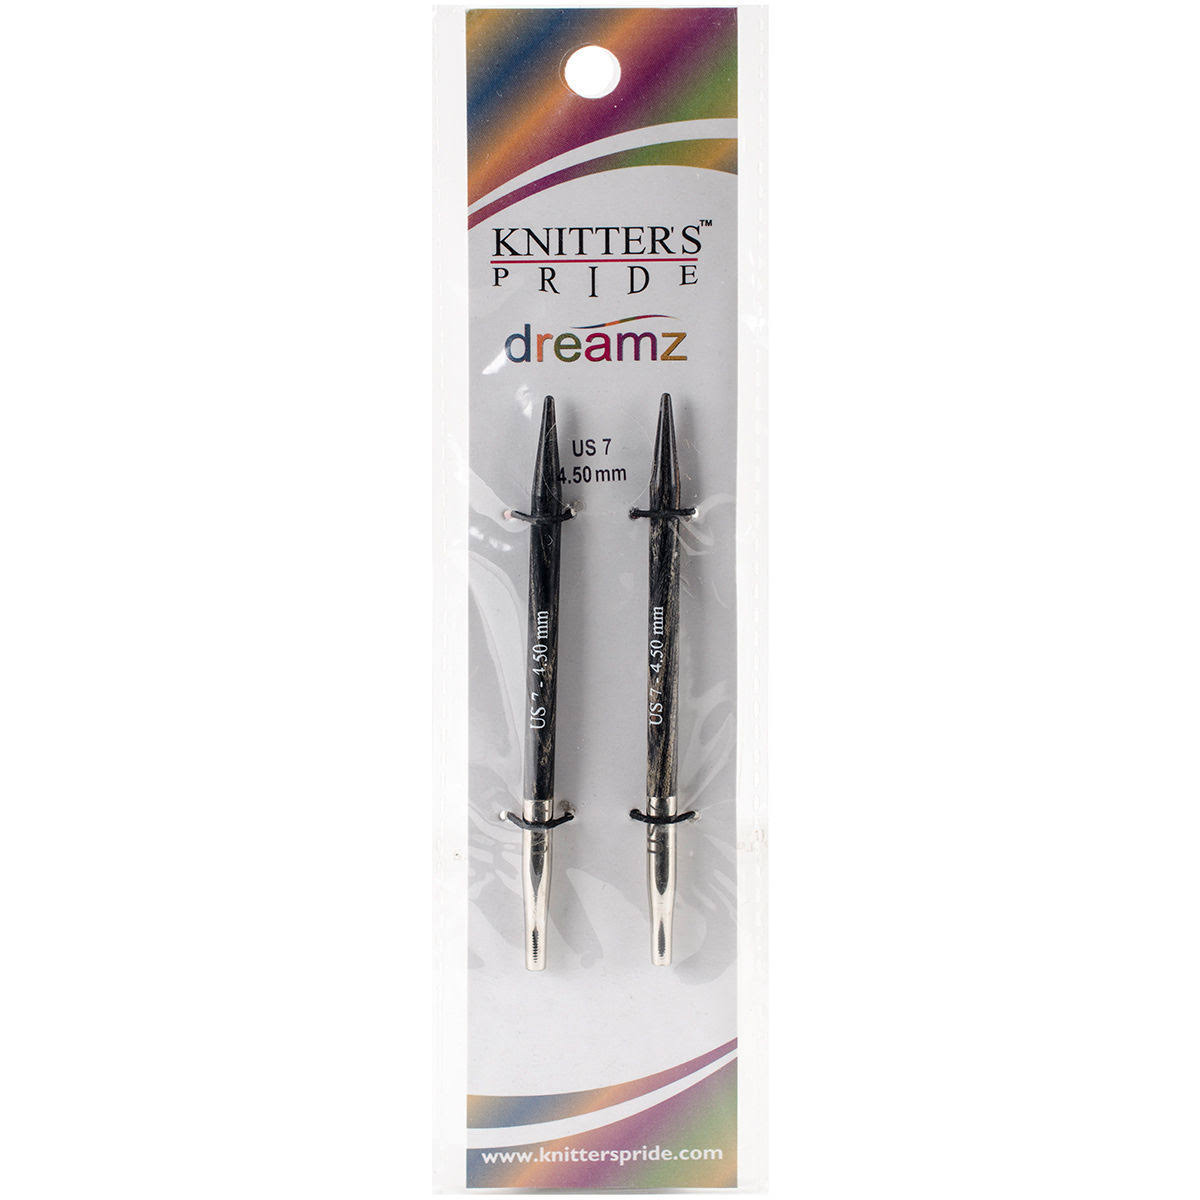 Knitter's Pride Dreamz Special Interchangeable 4" Needle Tips (1 Pair) - 4.50mm (US 7)